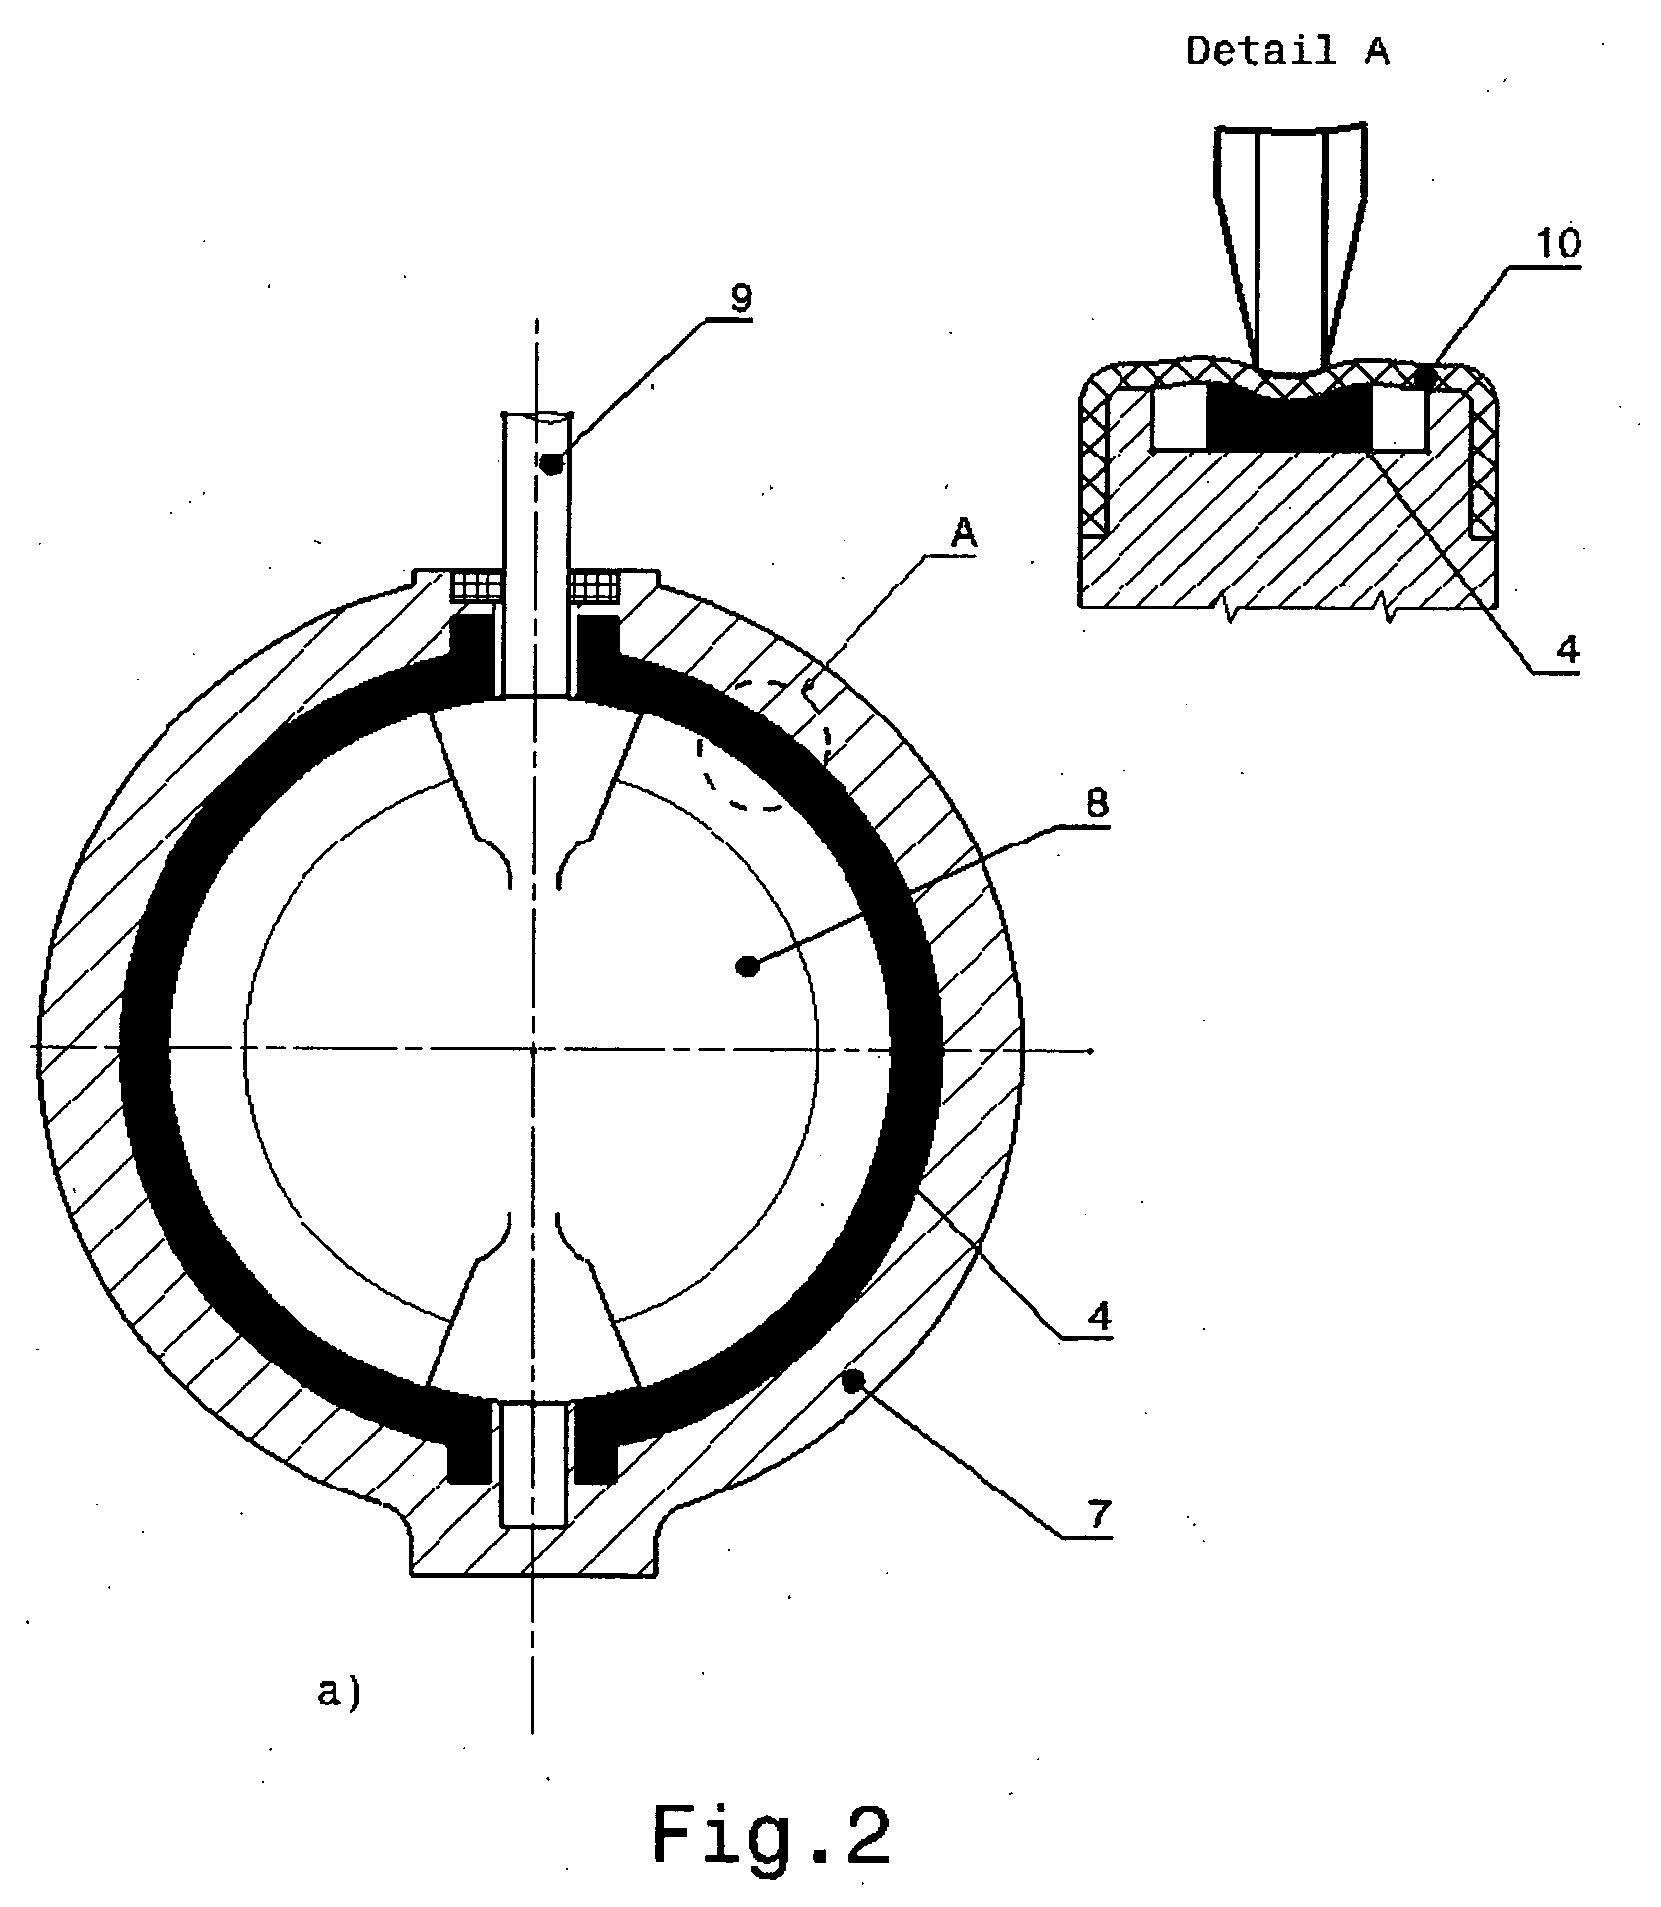 Method of sealing machine components